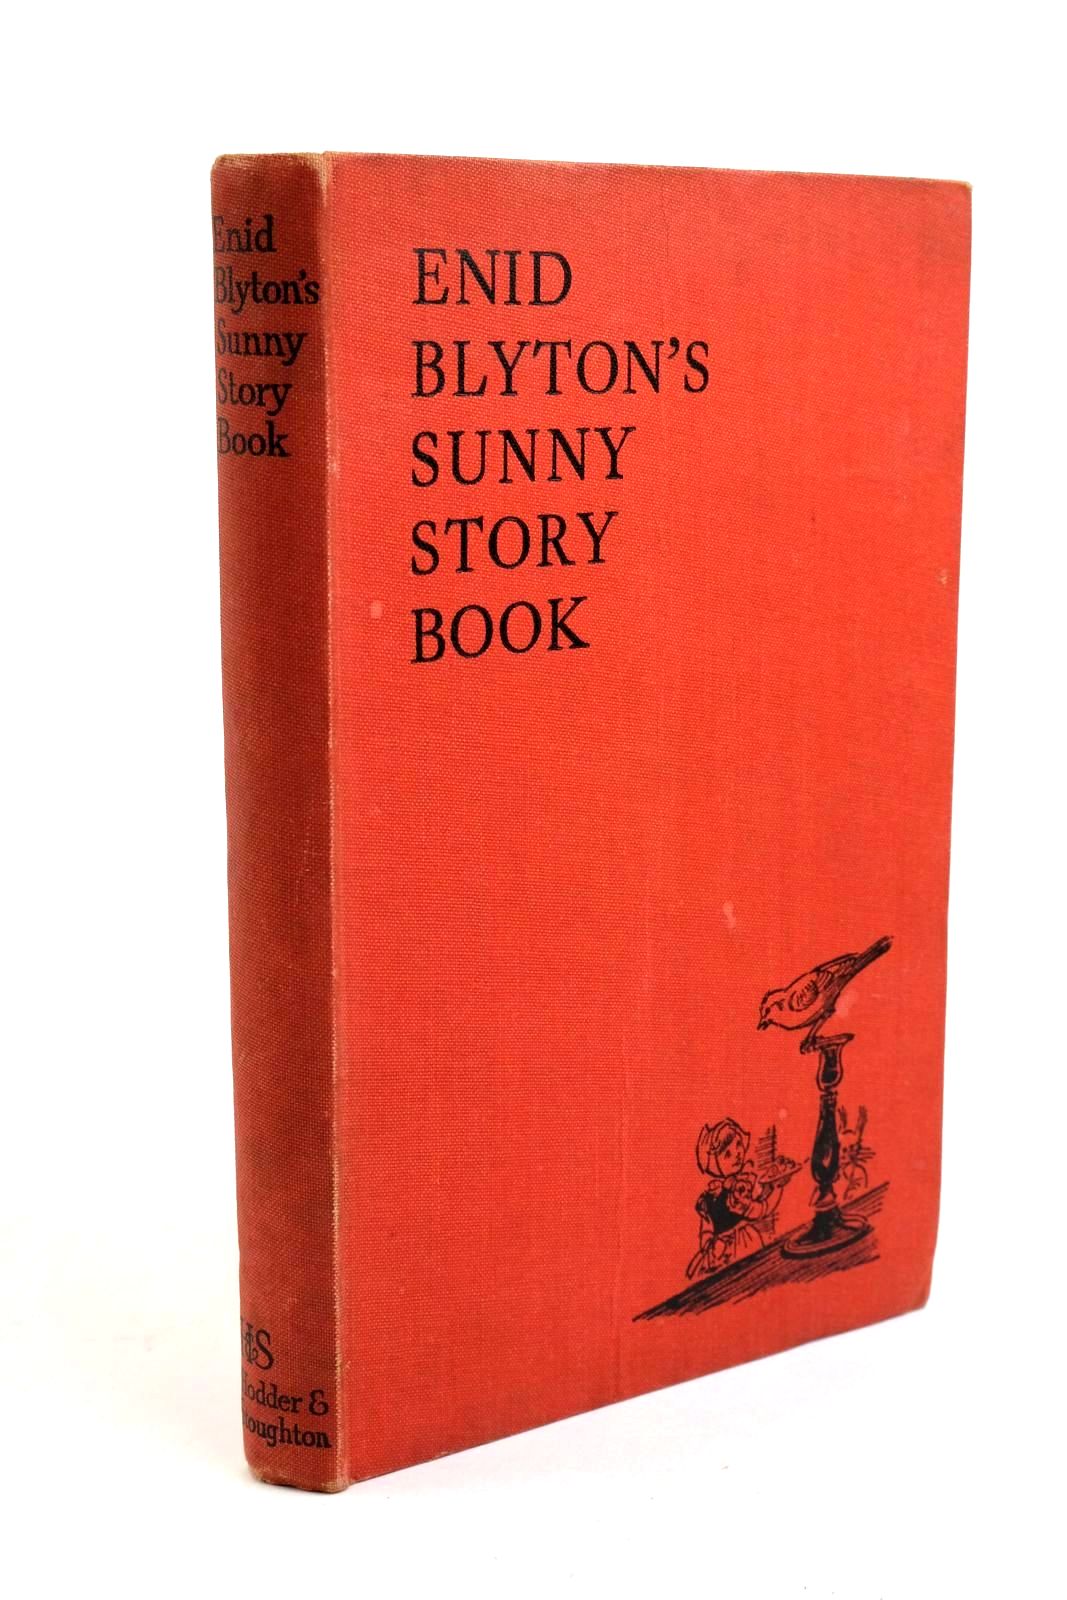 Photo of ENID BLYTON'S SUNNY STORY BOOK written by Blyton, Enid illustrated by Soper, Eileen published by Hodder & Stoughton (STOCK CODE: 1321813)  for sale by Stella & Rose's Books